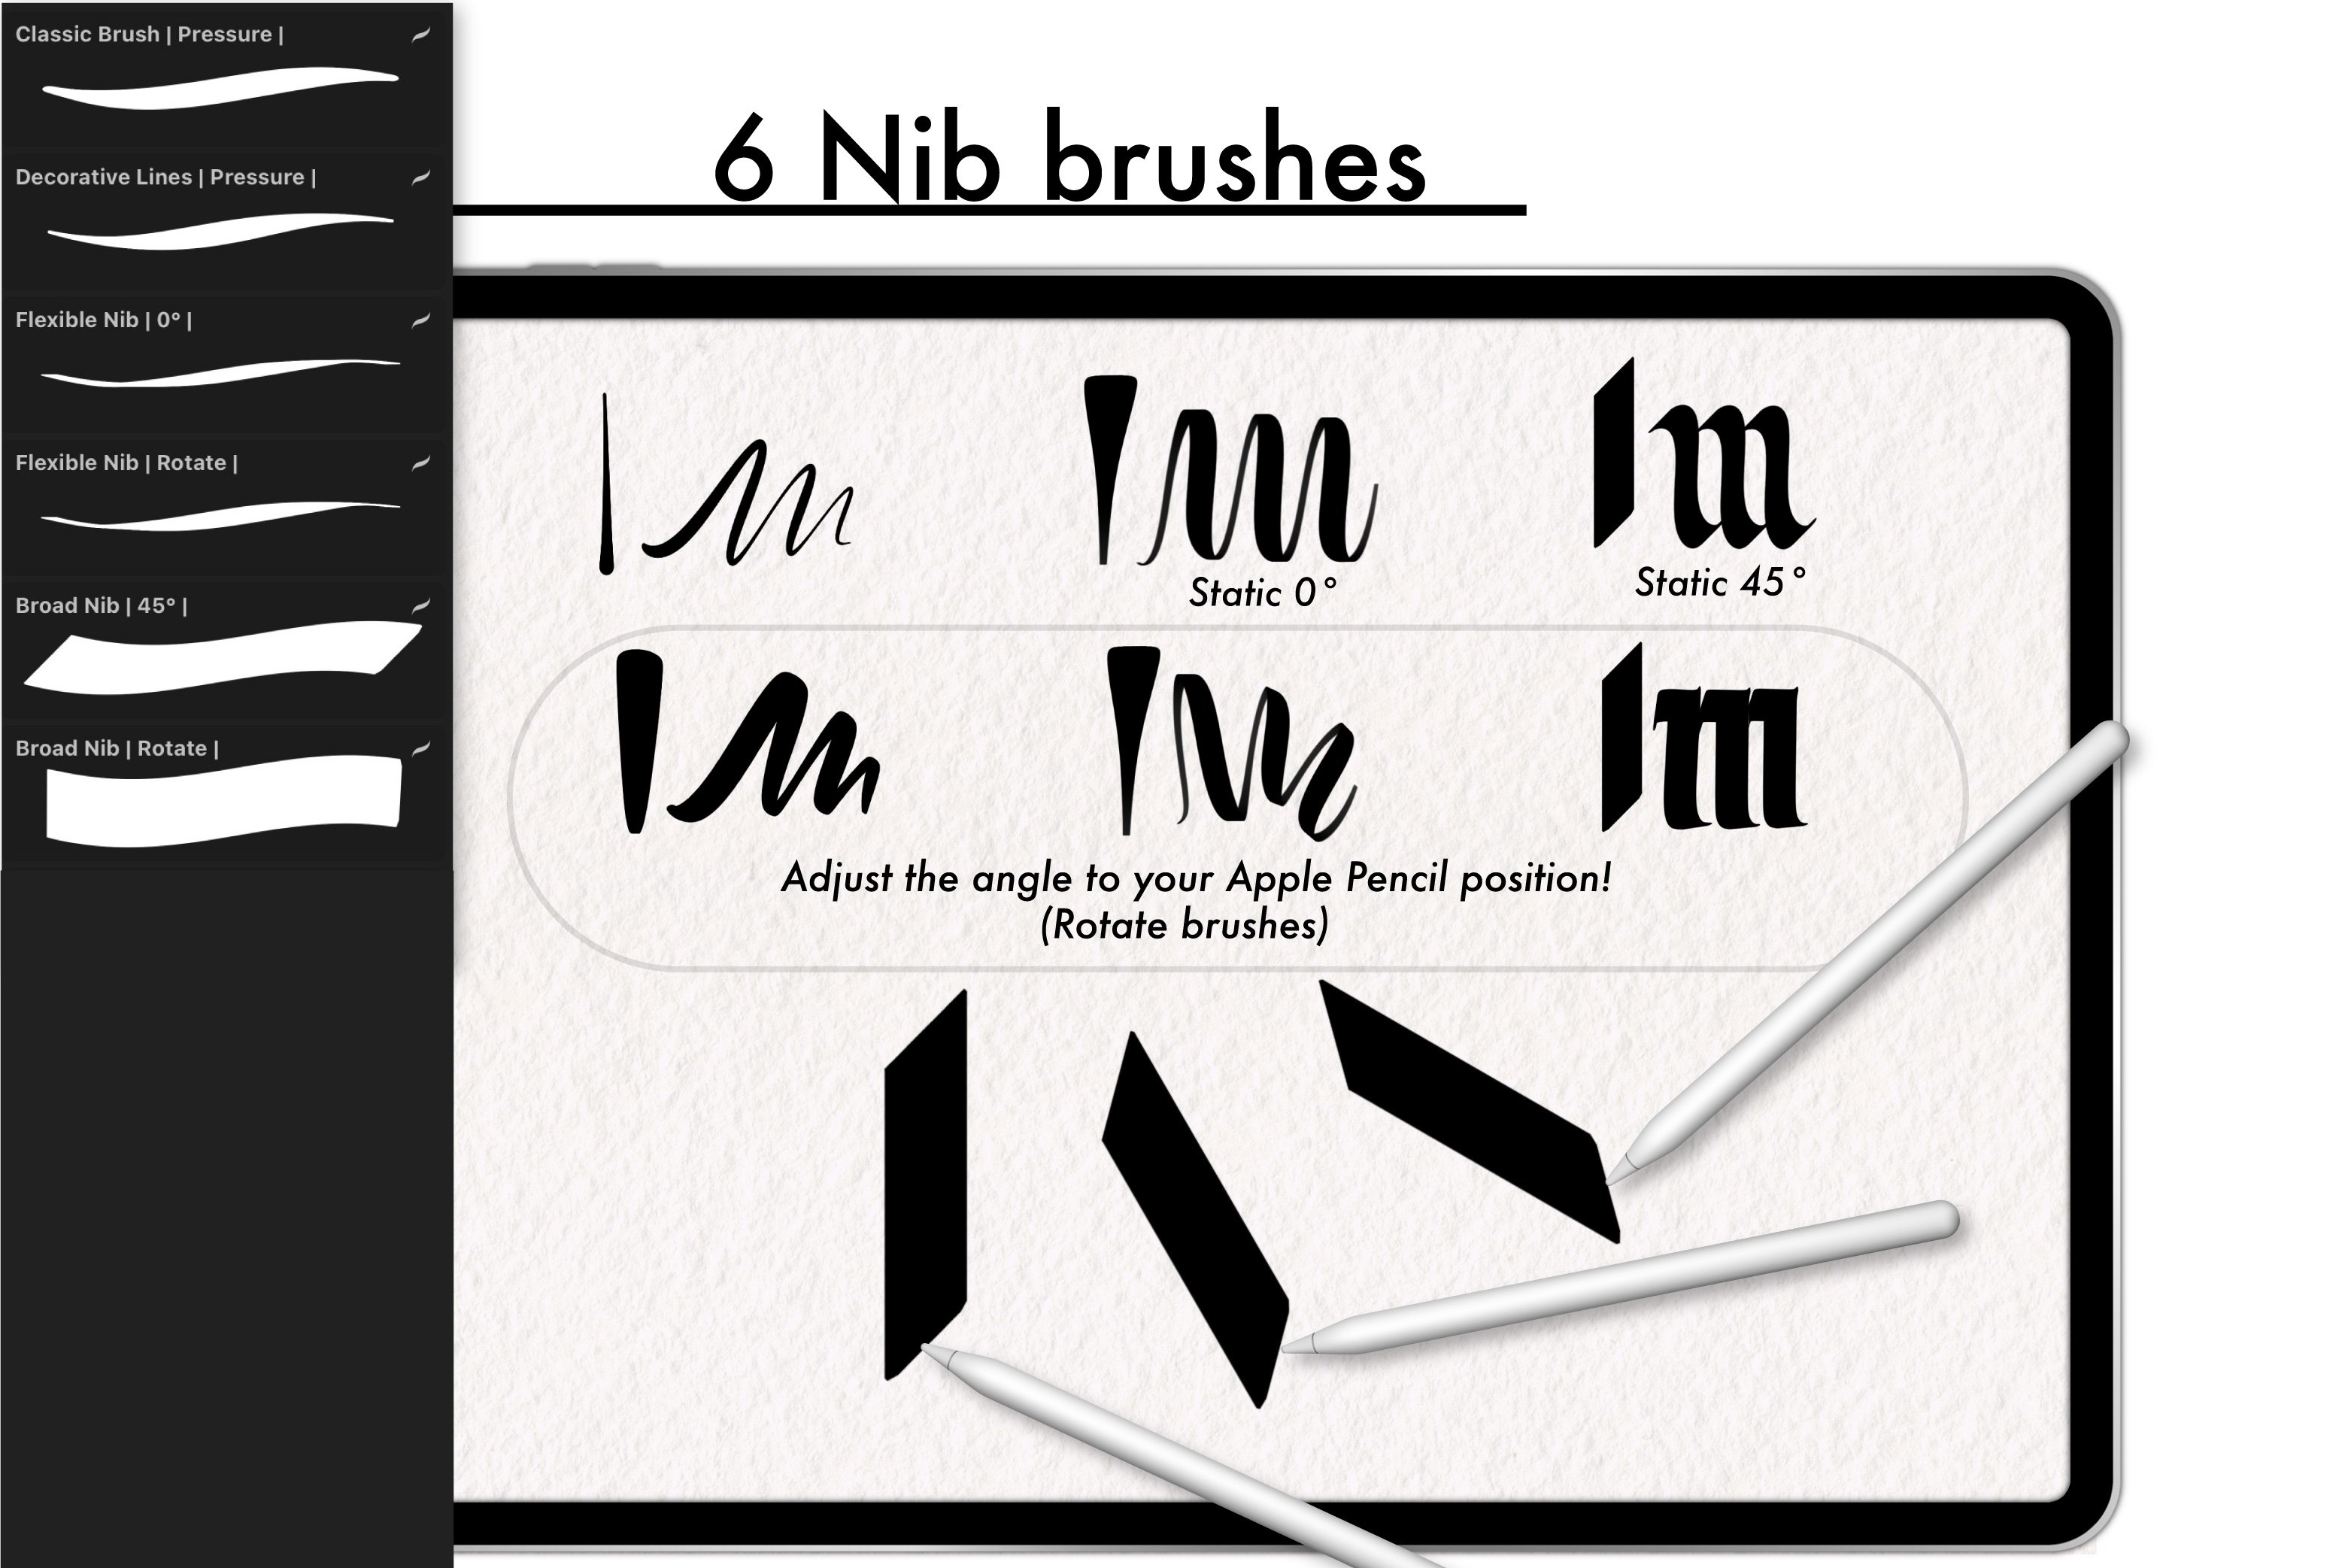 PDF] Improving Your Brush Calligraphy Workbook by Nico Ng